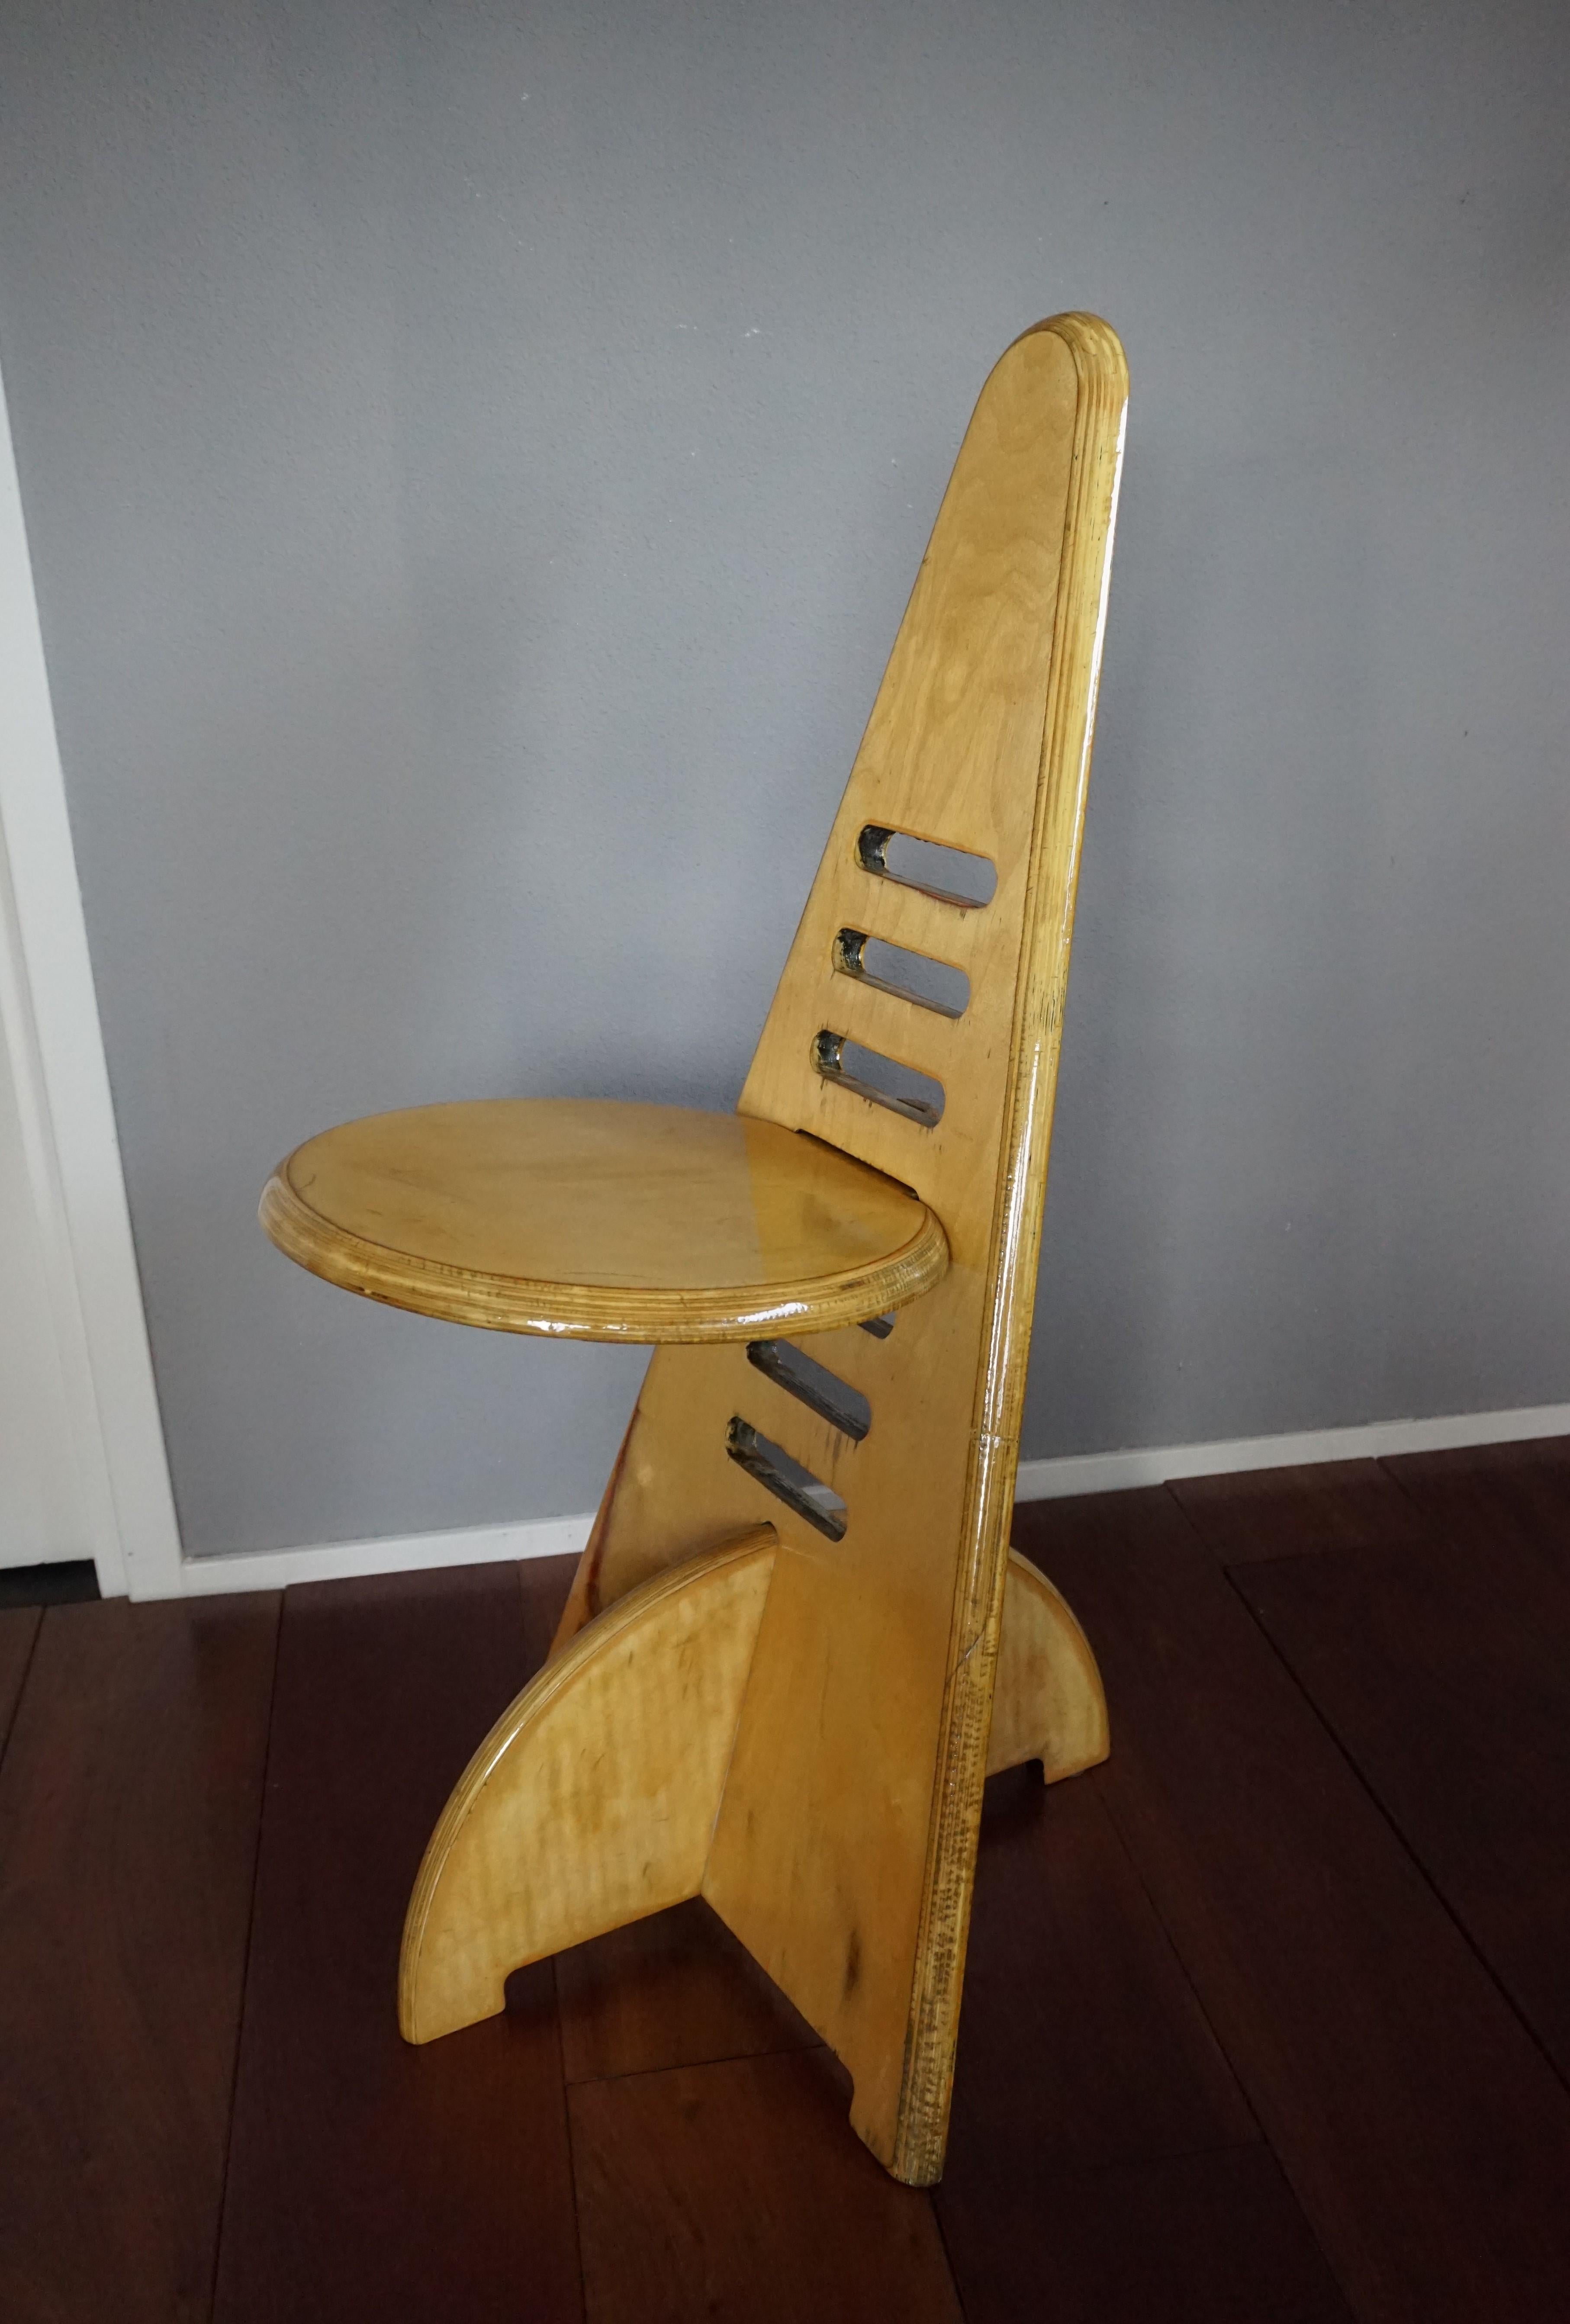 Hand-Crafted Rare Design & Height Adjustable Mid-Century Modern Plywood Music Chair and Stand